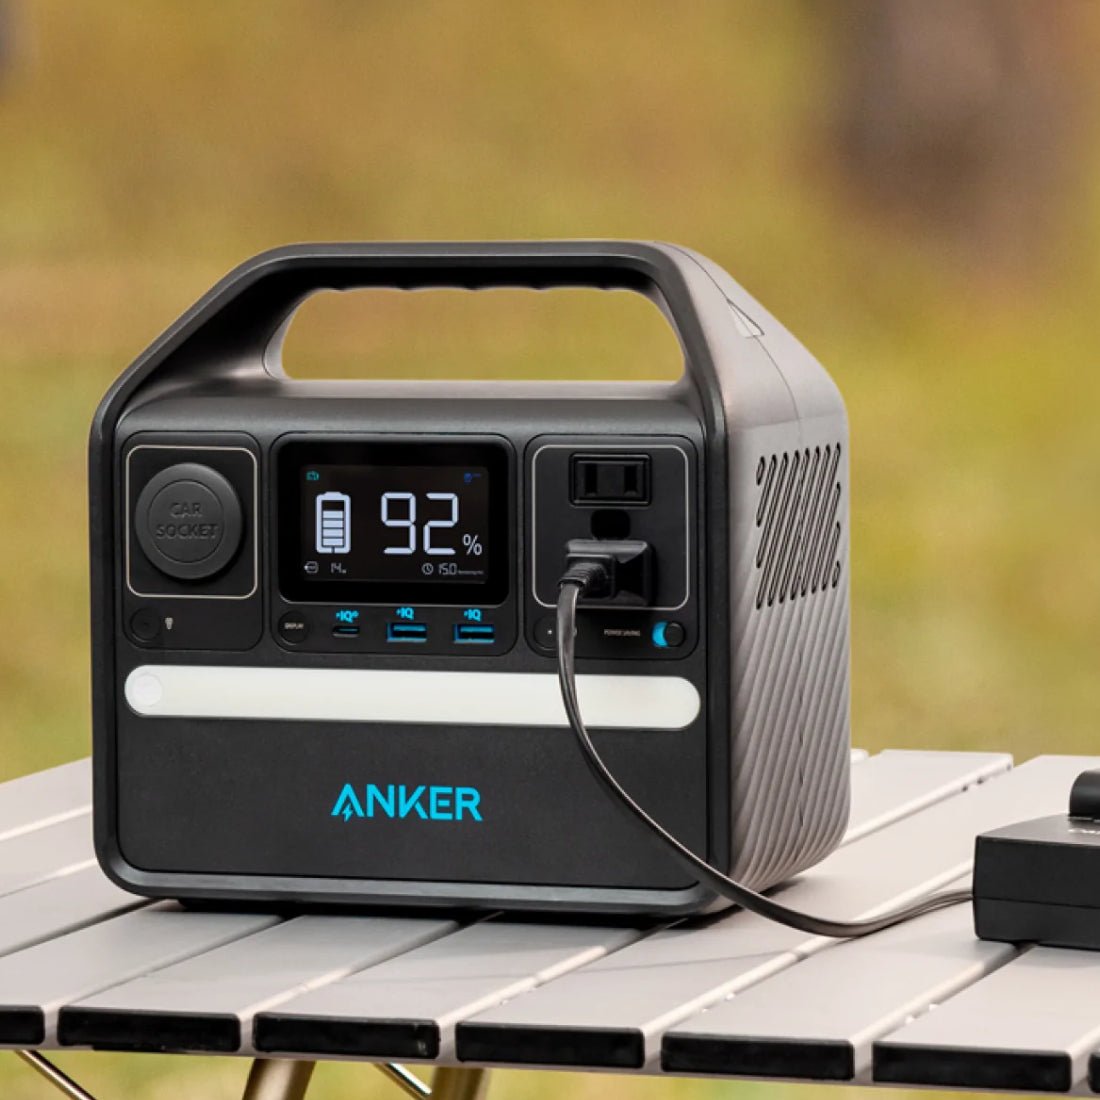 Anker 521 Portable 256Wh Power Station - Black - مزود طاقة - Store 974 | ستور ٩٧٤